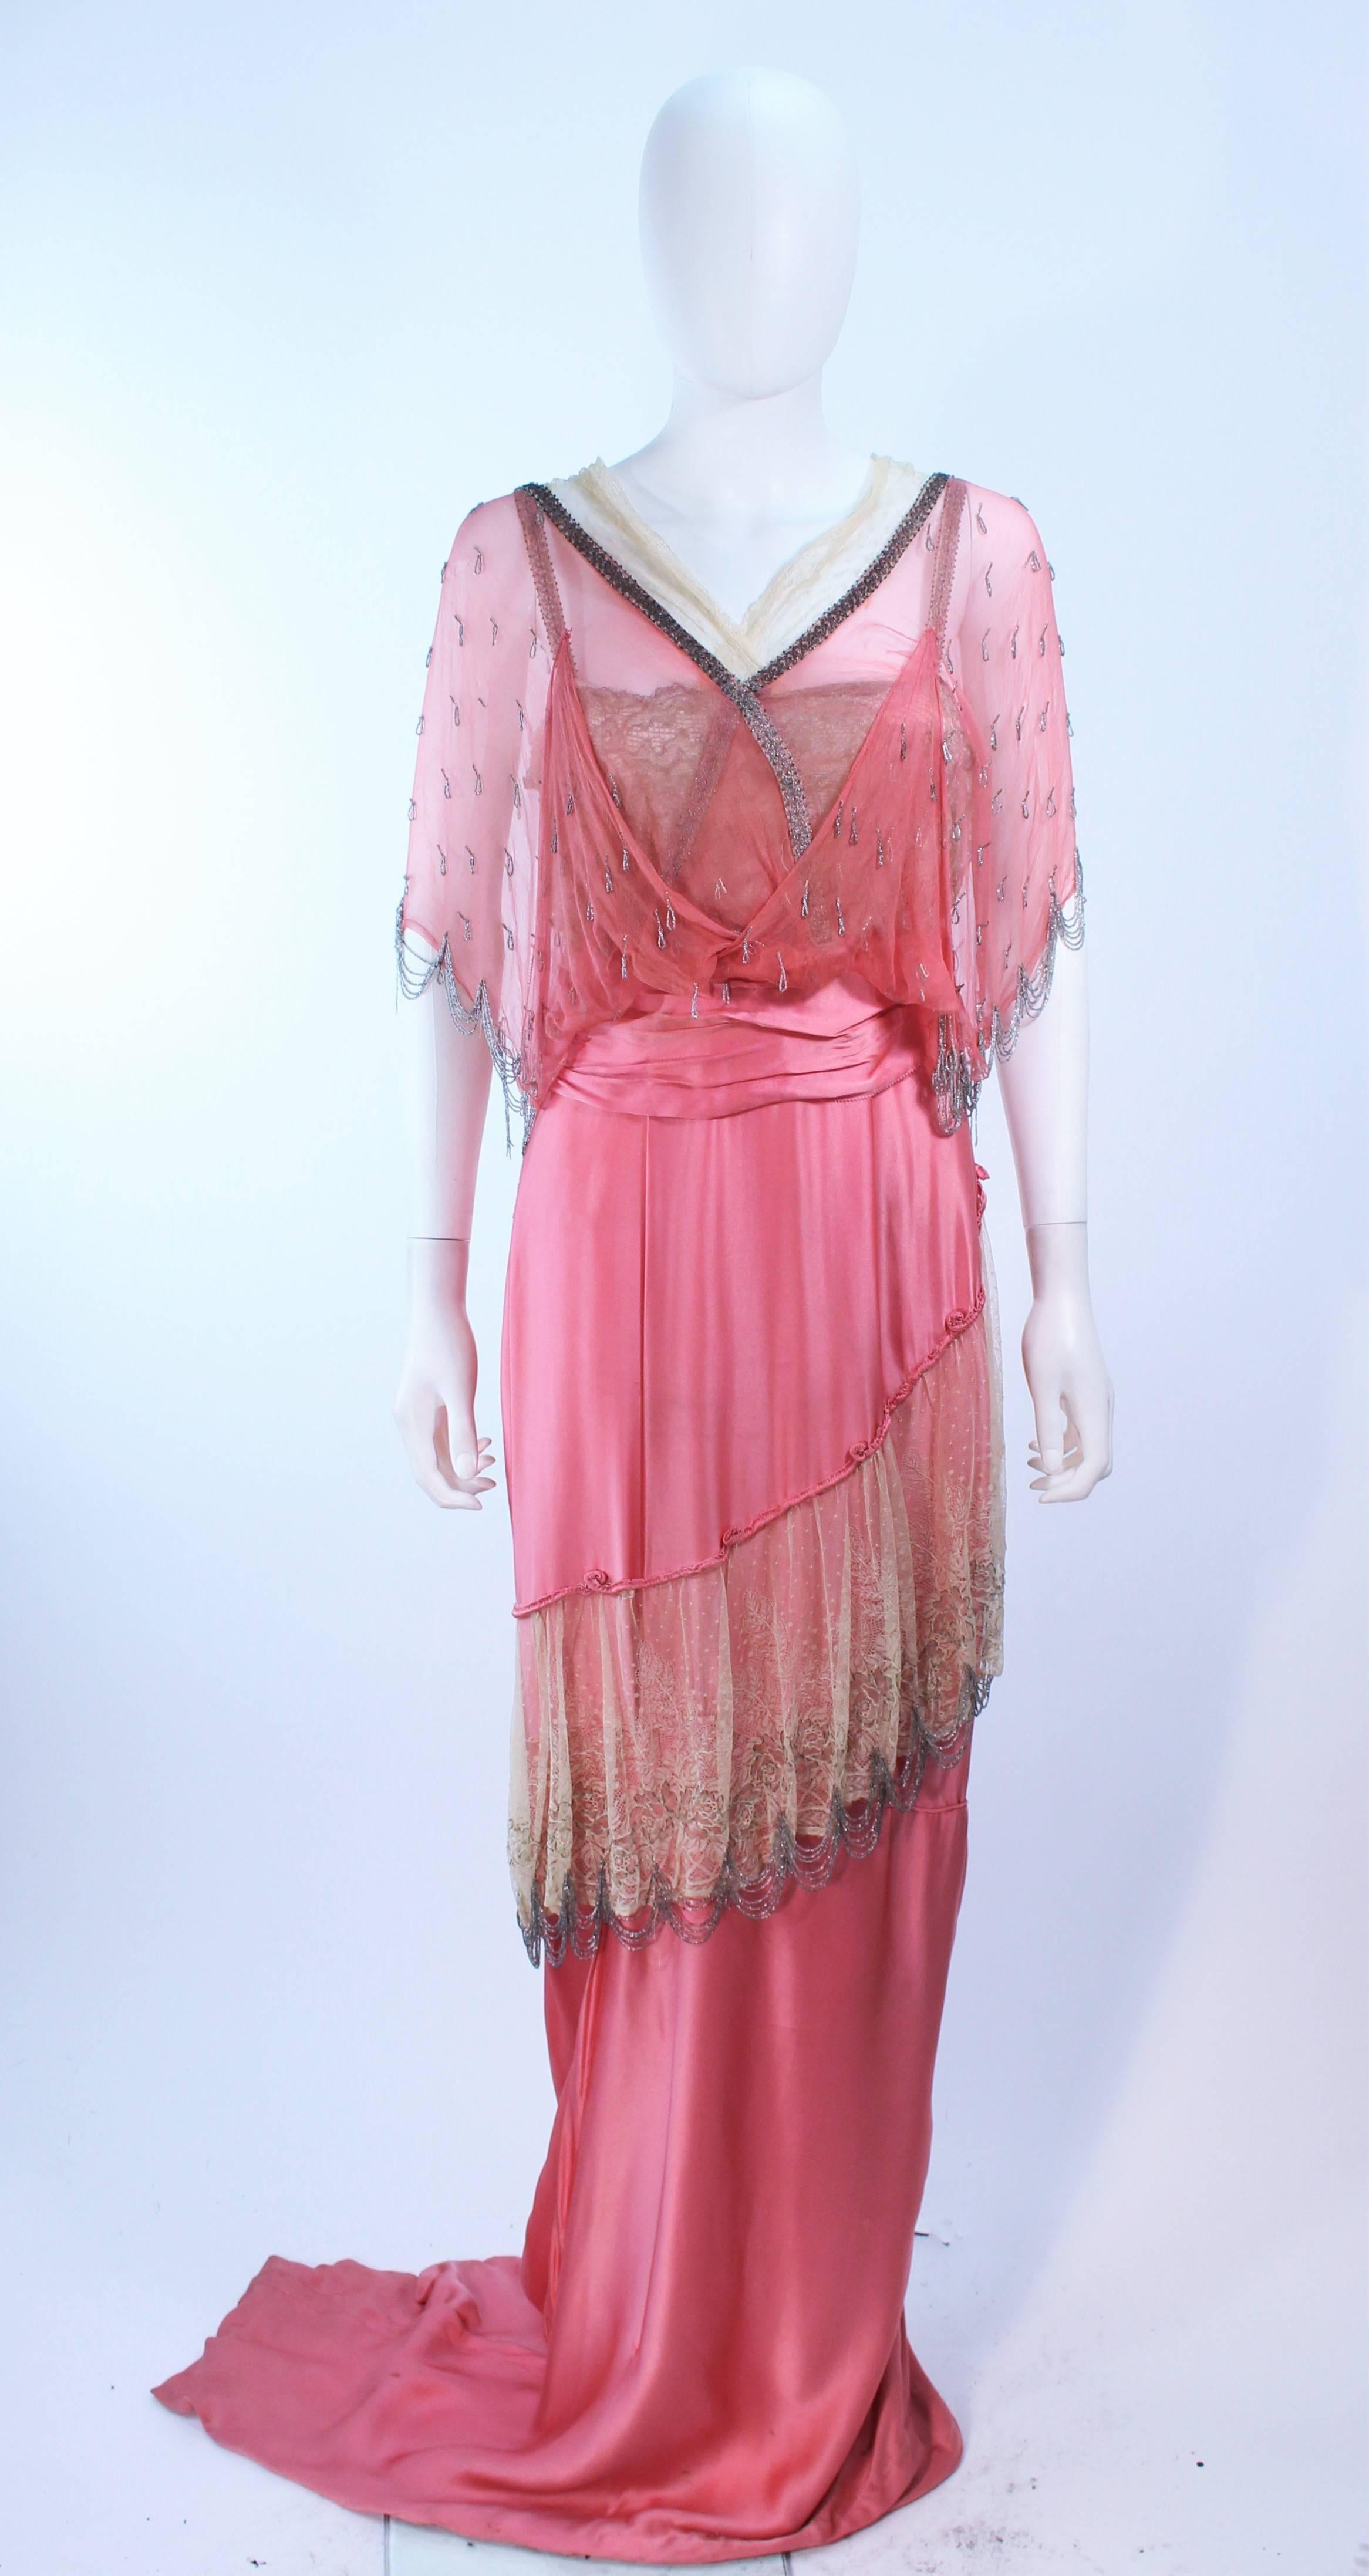 This Victorian gown is composed of a pink silk with lace trim and a beaded applique throughout. Features a drape style with chiffon. There are hook and eye closures with snaps. In antique vintage condition, there is discoloration and deterioration